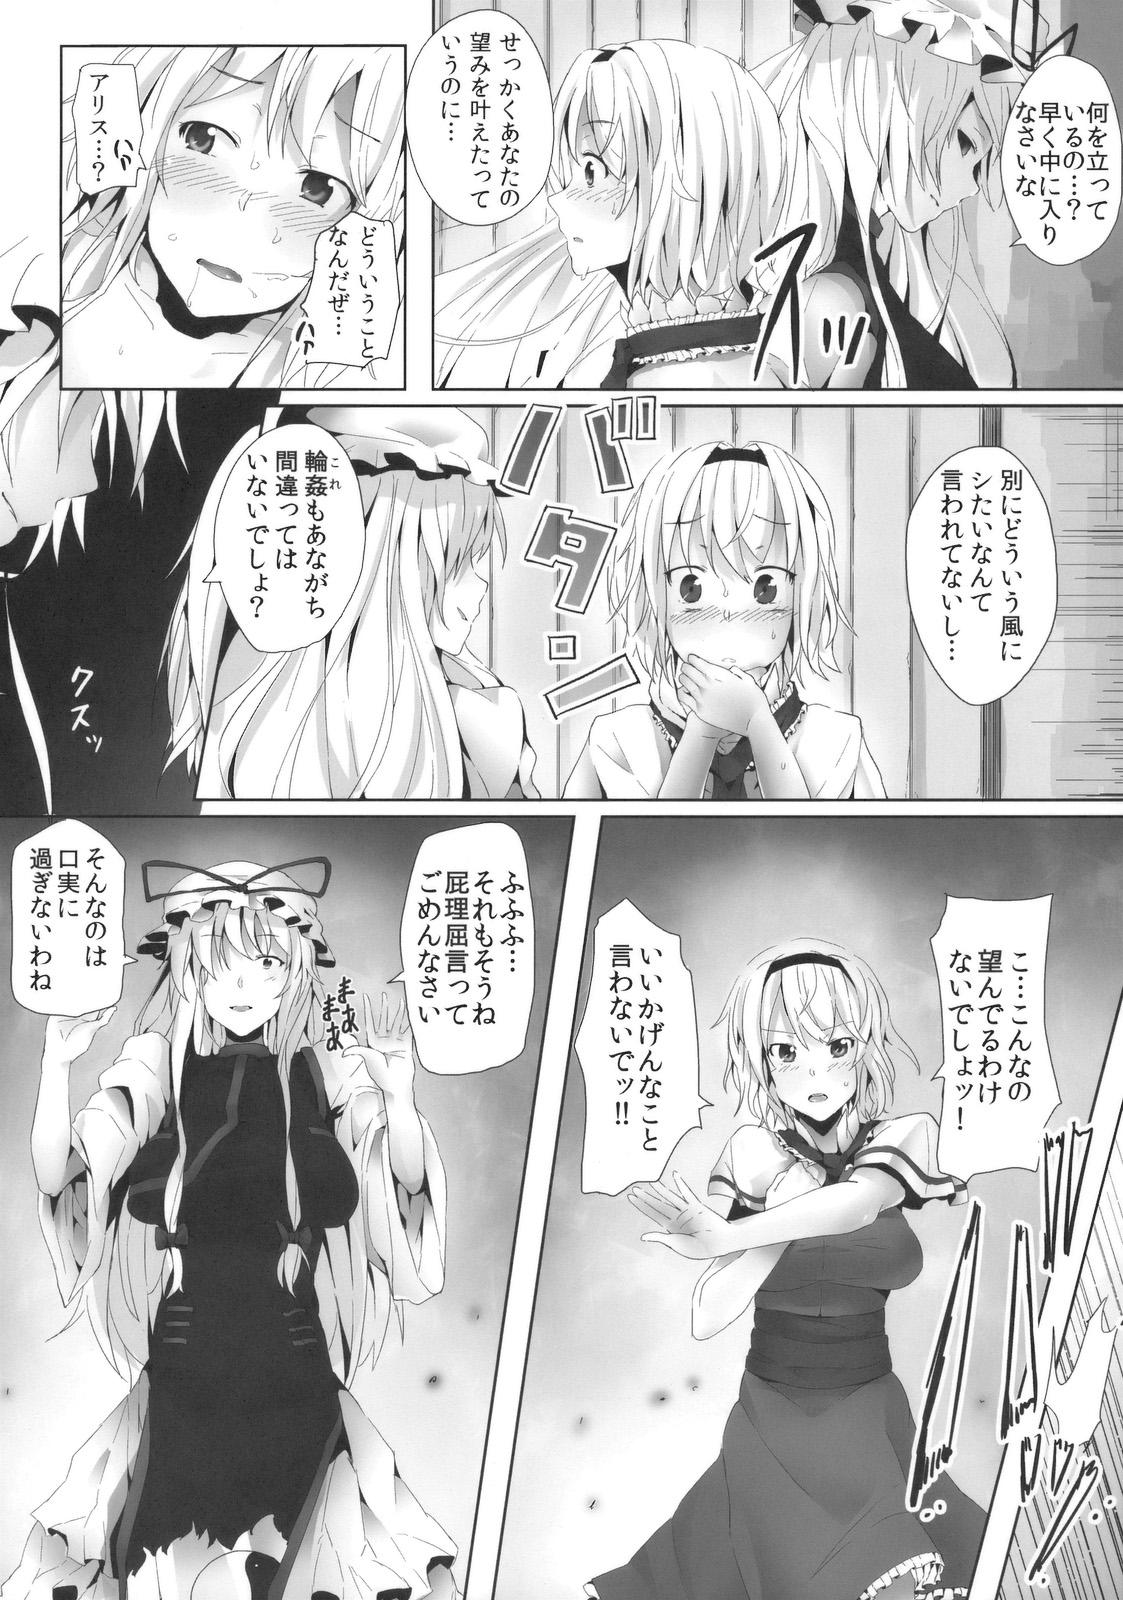 Hot Women Having Sex Alice in Underland - Touhou project Dildos - Page 6